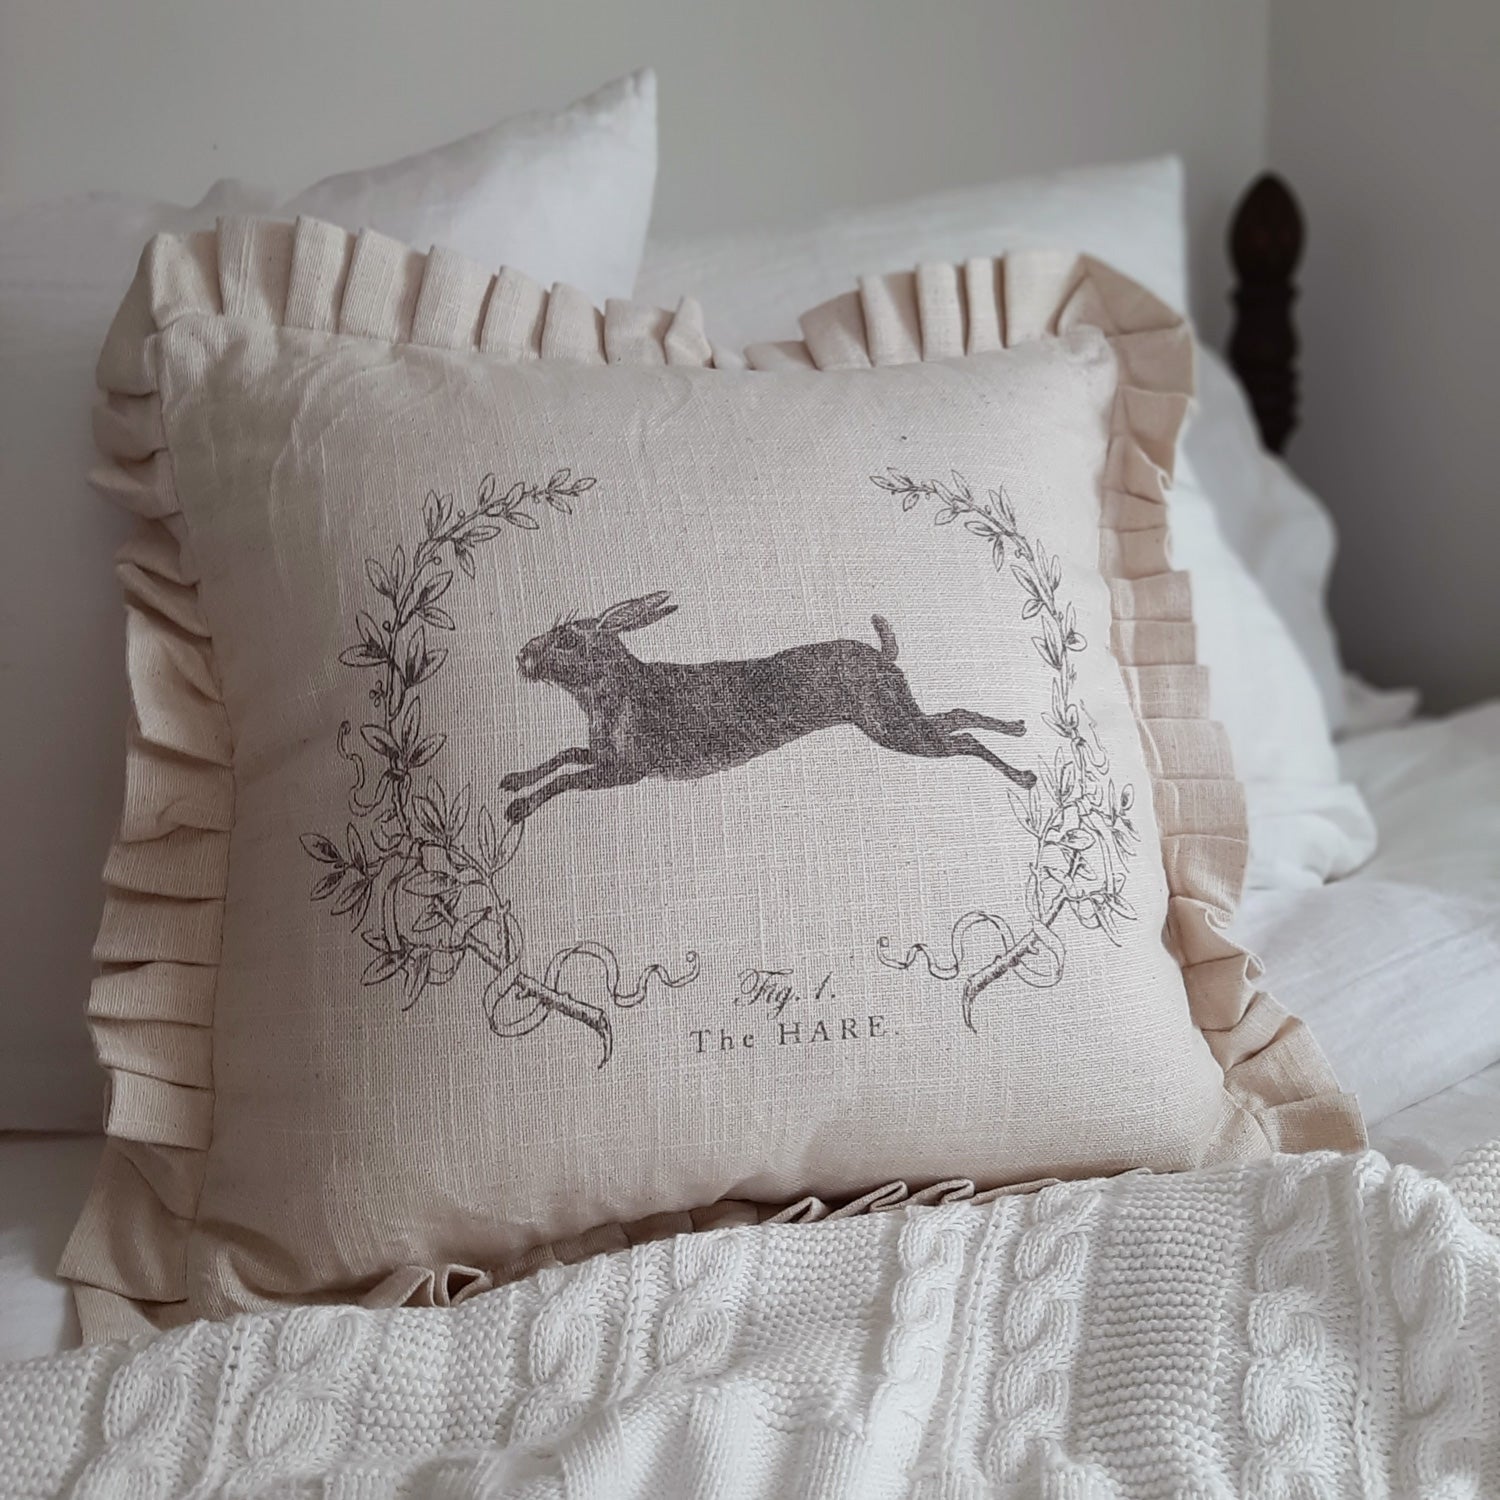 This Linen Style Hare Pillow with Ruffles lends a vintage charm to any room. Made of 100% cotton, this super soft pillow features a leaping bunny illustration on a rustic linen look fabric that has a warm oatmeal color. It instantly brings a cozy, down-to-earth sensibility to any farmhouse. The sweet ruffled edging lends a cottage feel.  Backside features a zippered closure. 100% cotton. 16"L x 16"H. Pillow insert made of 100% Polyester.